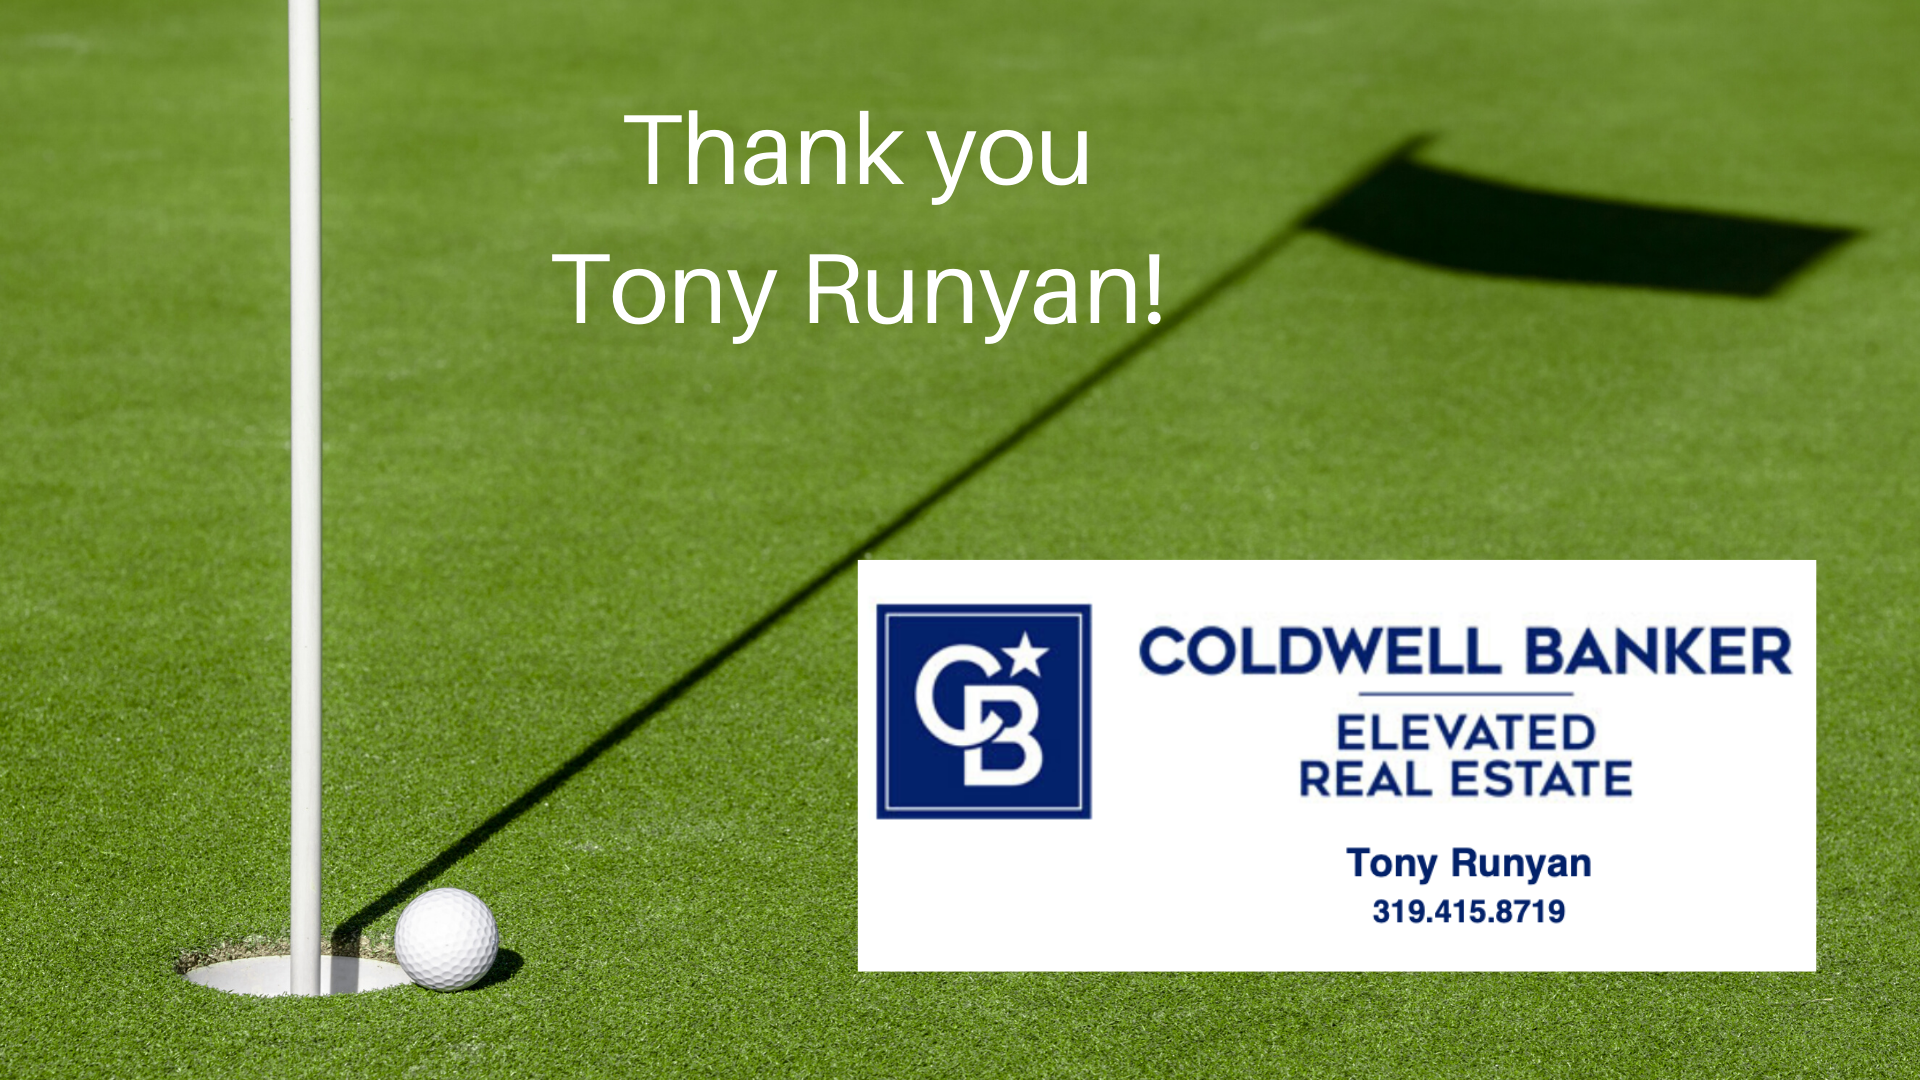 Elevated Real Estate / Coldwell Banker - Tony Runyan